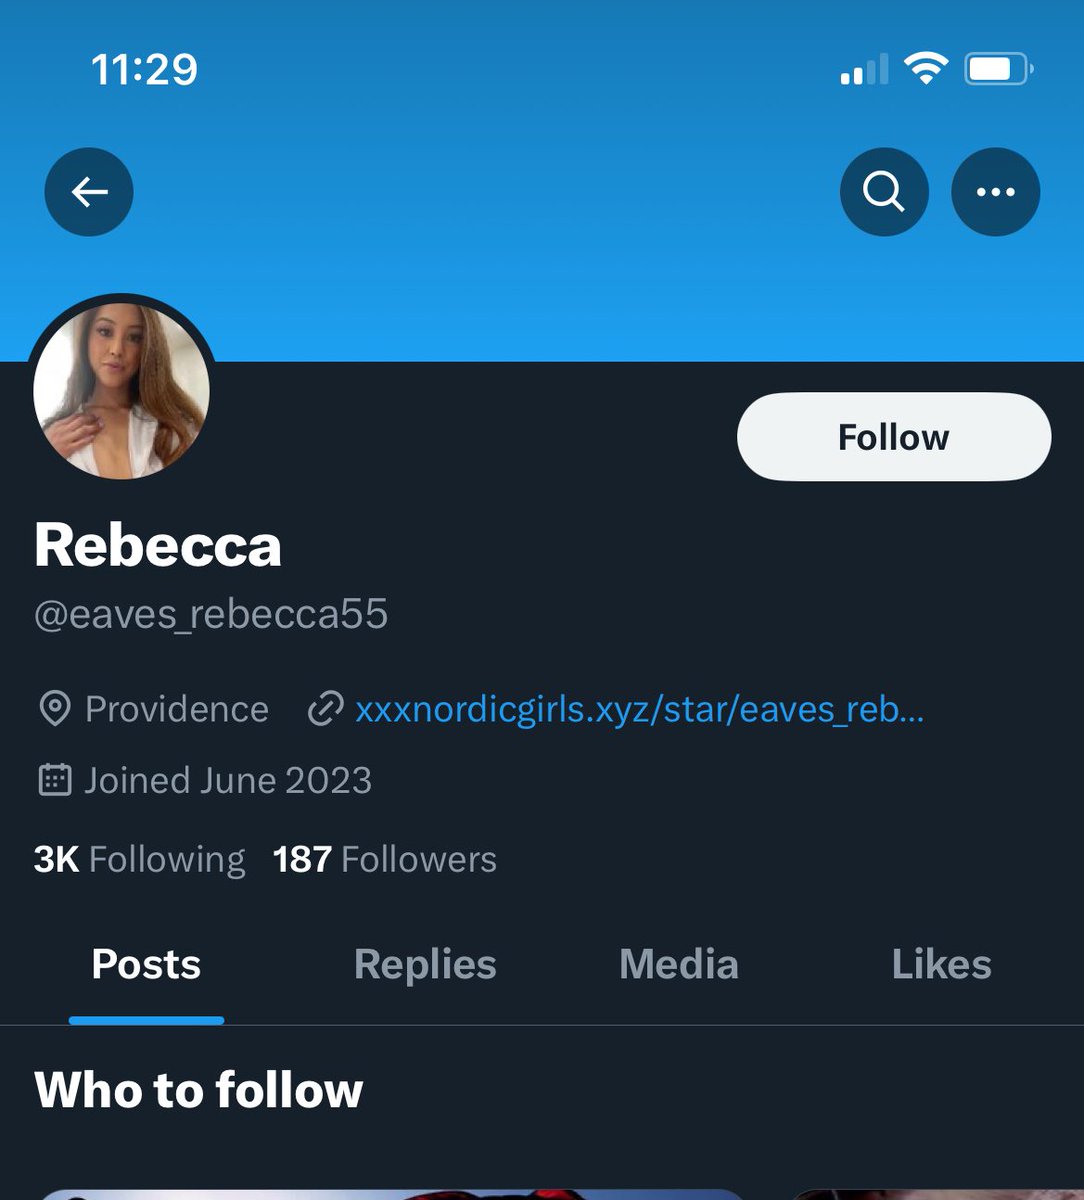 What, if anything, is being done with the likely millions of accounts that:

- follow thousands of accounts
- have no real followers
- and have never made a post

Examples:
@BlakelBar
@DorseyAnge75287
@eaves_rebecca55

What’s the purpose of these accounts? Engagement farms?